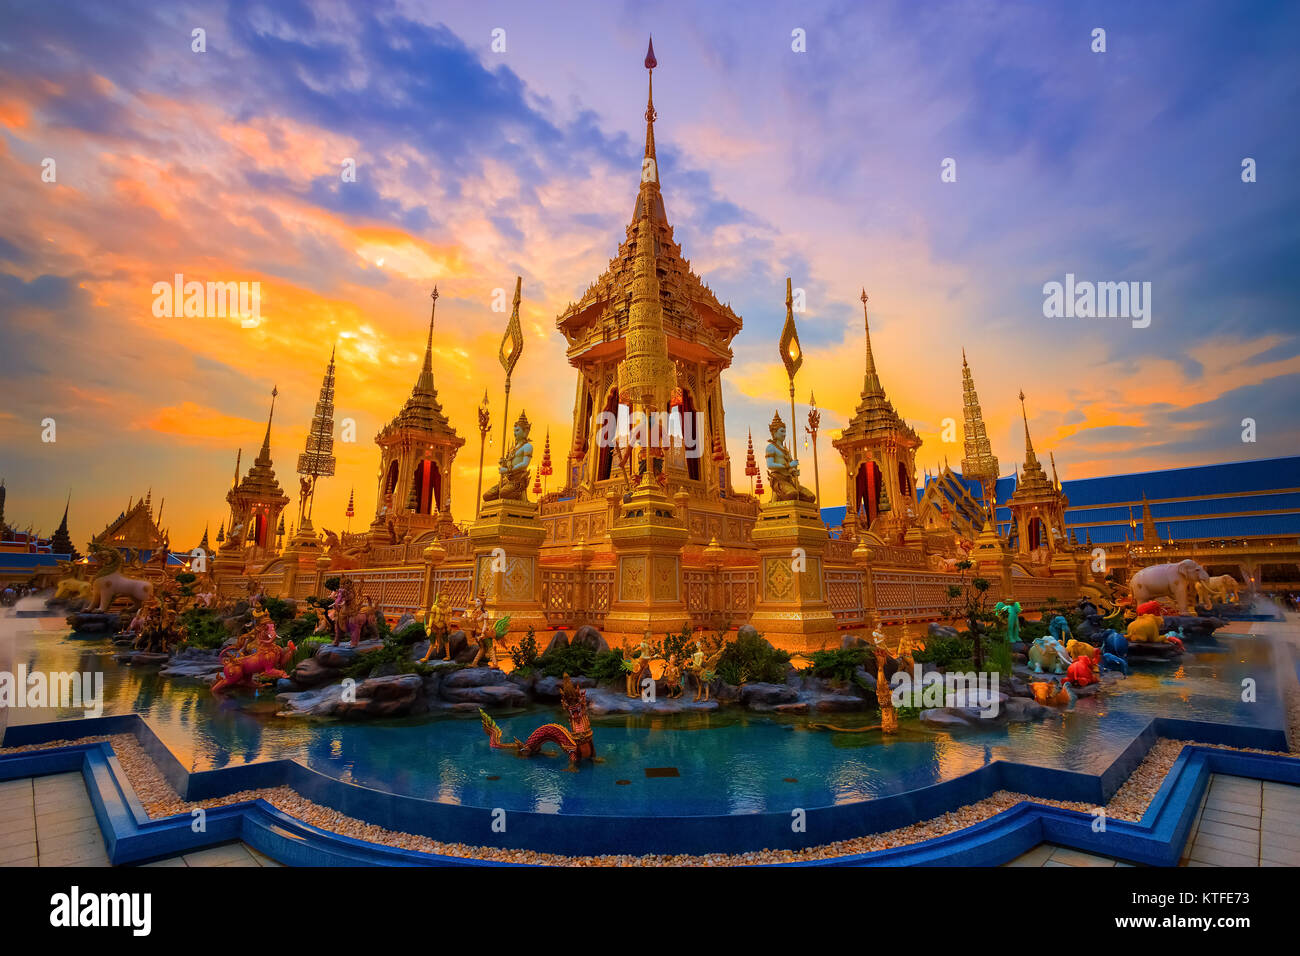 The Royal Crematorium of His Majesty King Bhumibol Adulyadej stands tall in Sanam Luang in front of the Grand Palace.  BANGKOK, THAILAND - NOVEMBER 15 Stock Photo